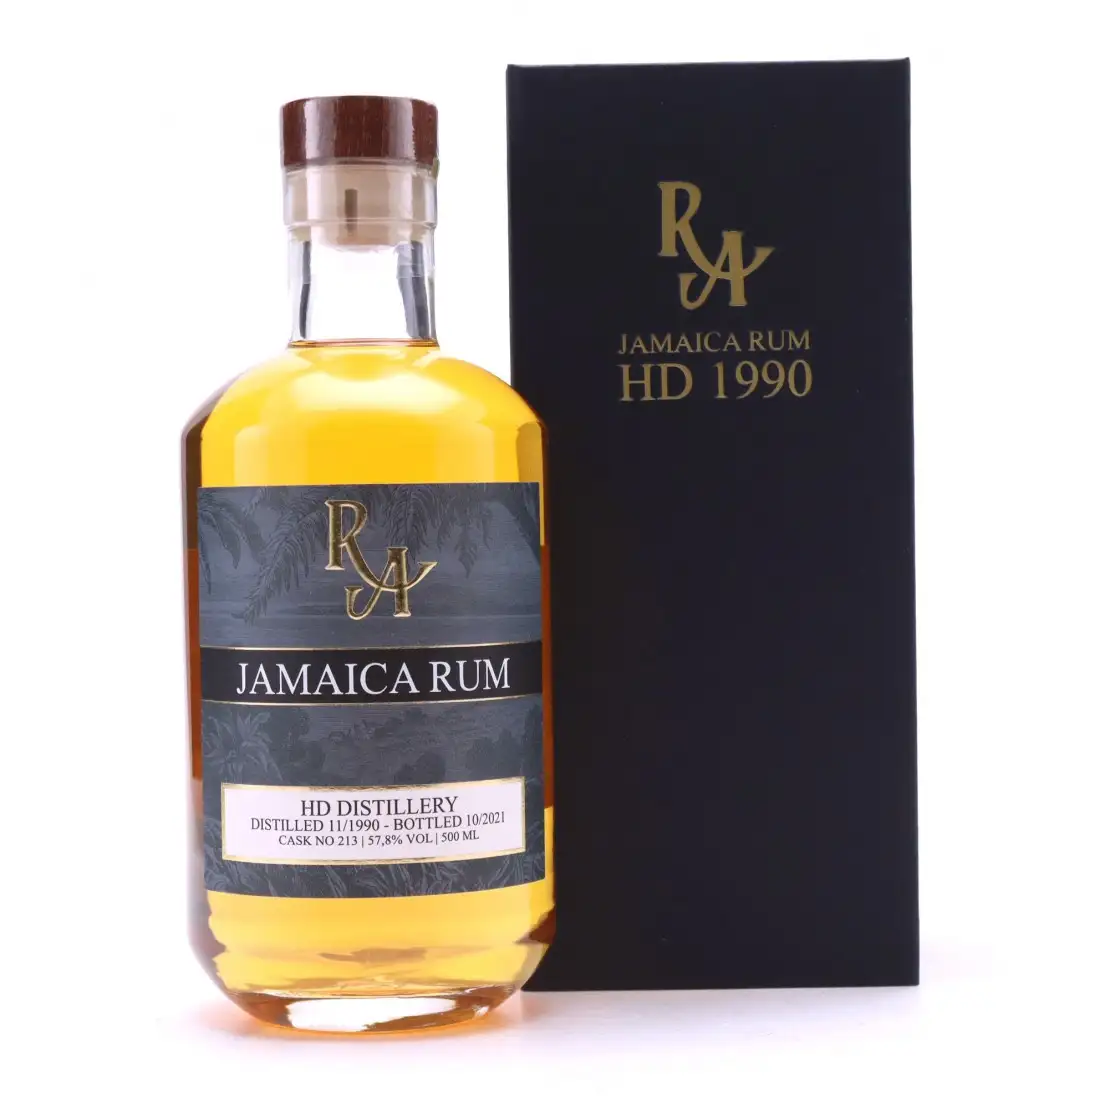 Image of the front of the bottle of the rum Rum Artesanal Jamaica Rum (HD Distillery) C<>H